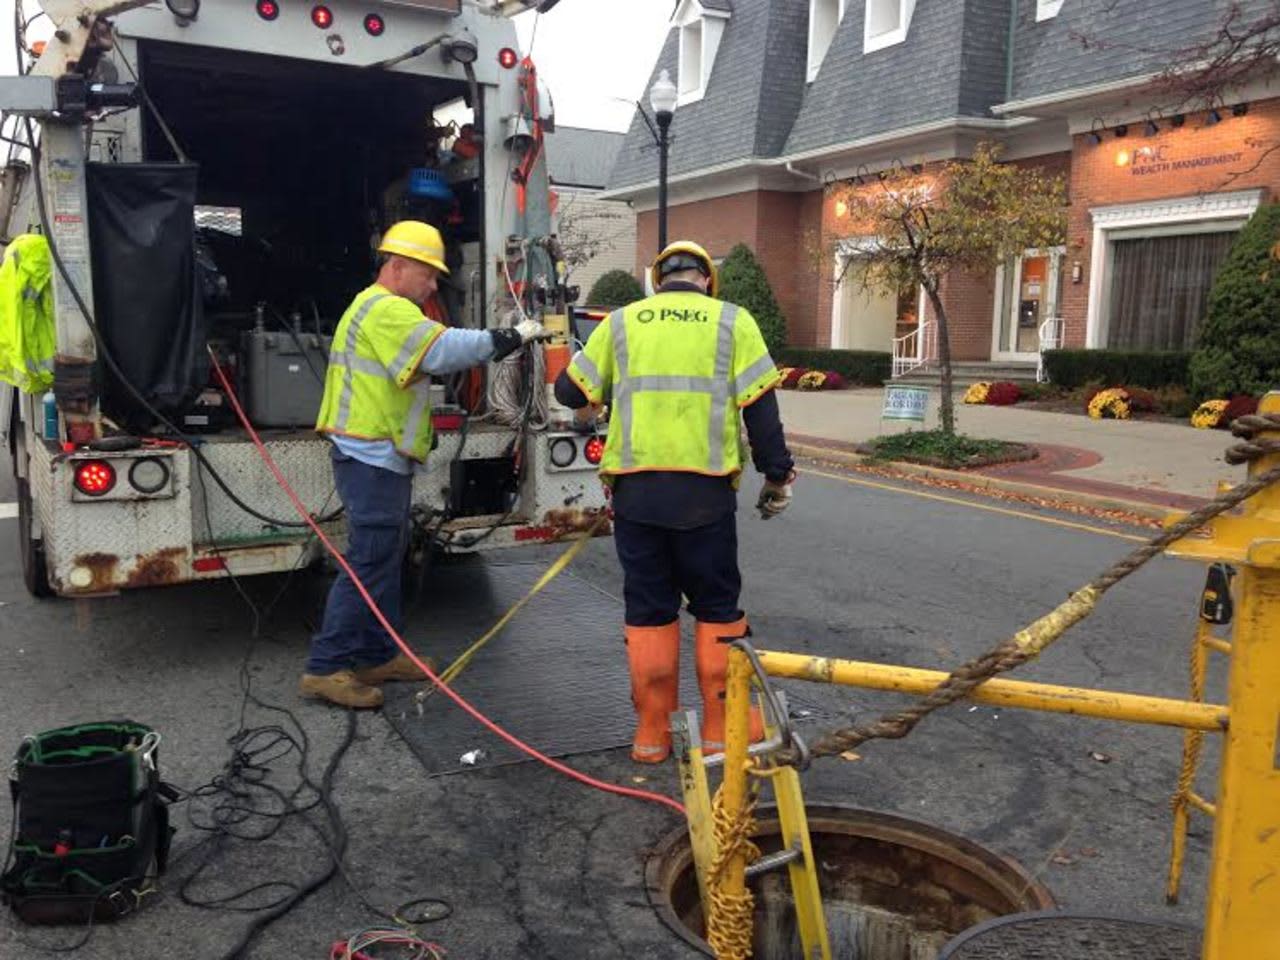 PSE&G workers descended into the manhole to check the electrical system in Ridgewood on Nov. 5.